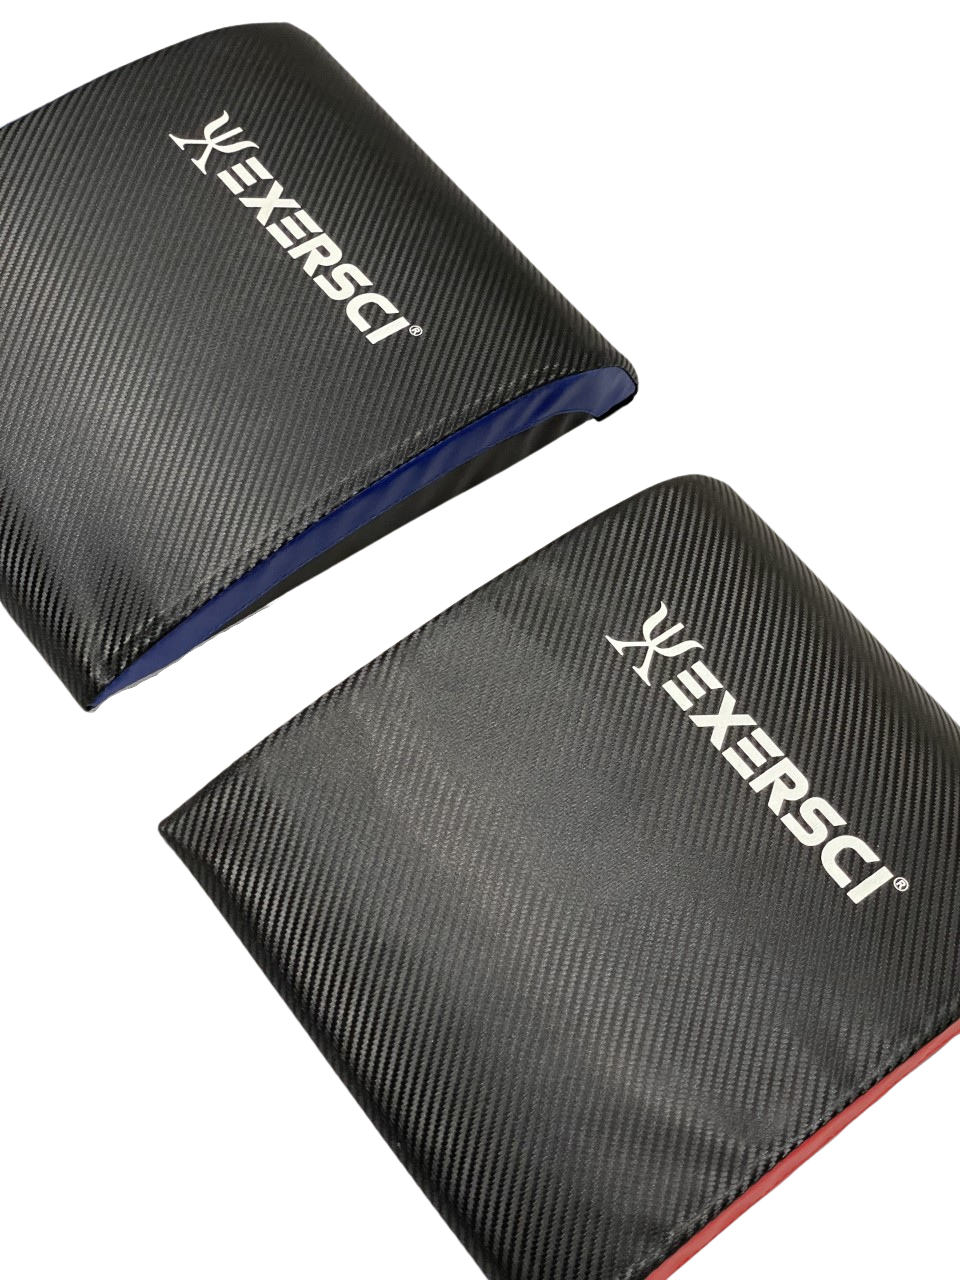 Exersci Padded Ab Mat